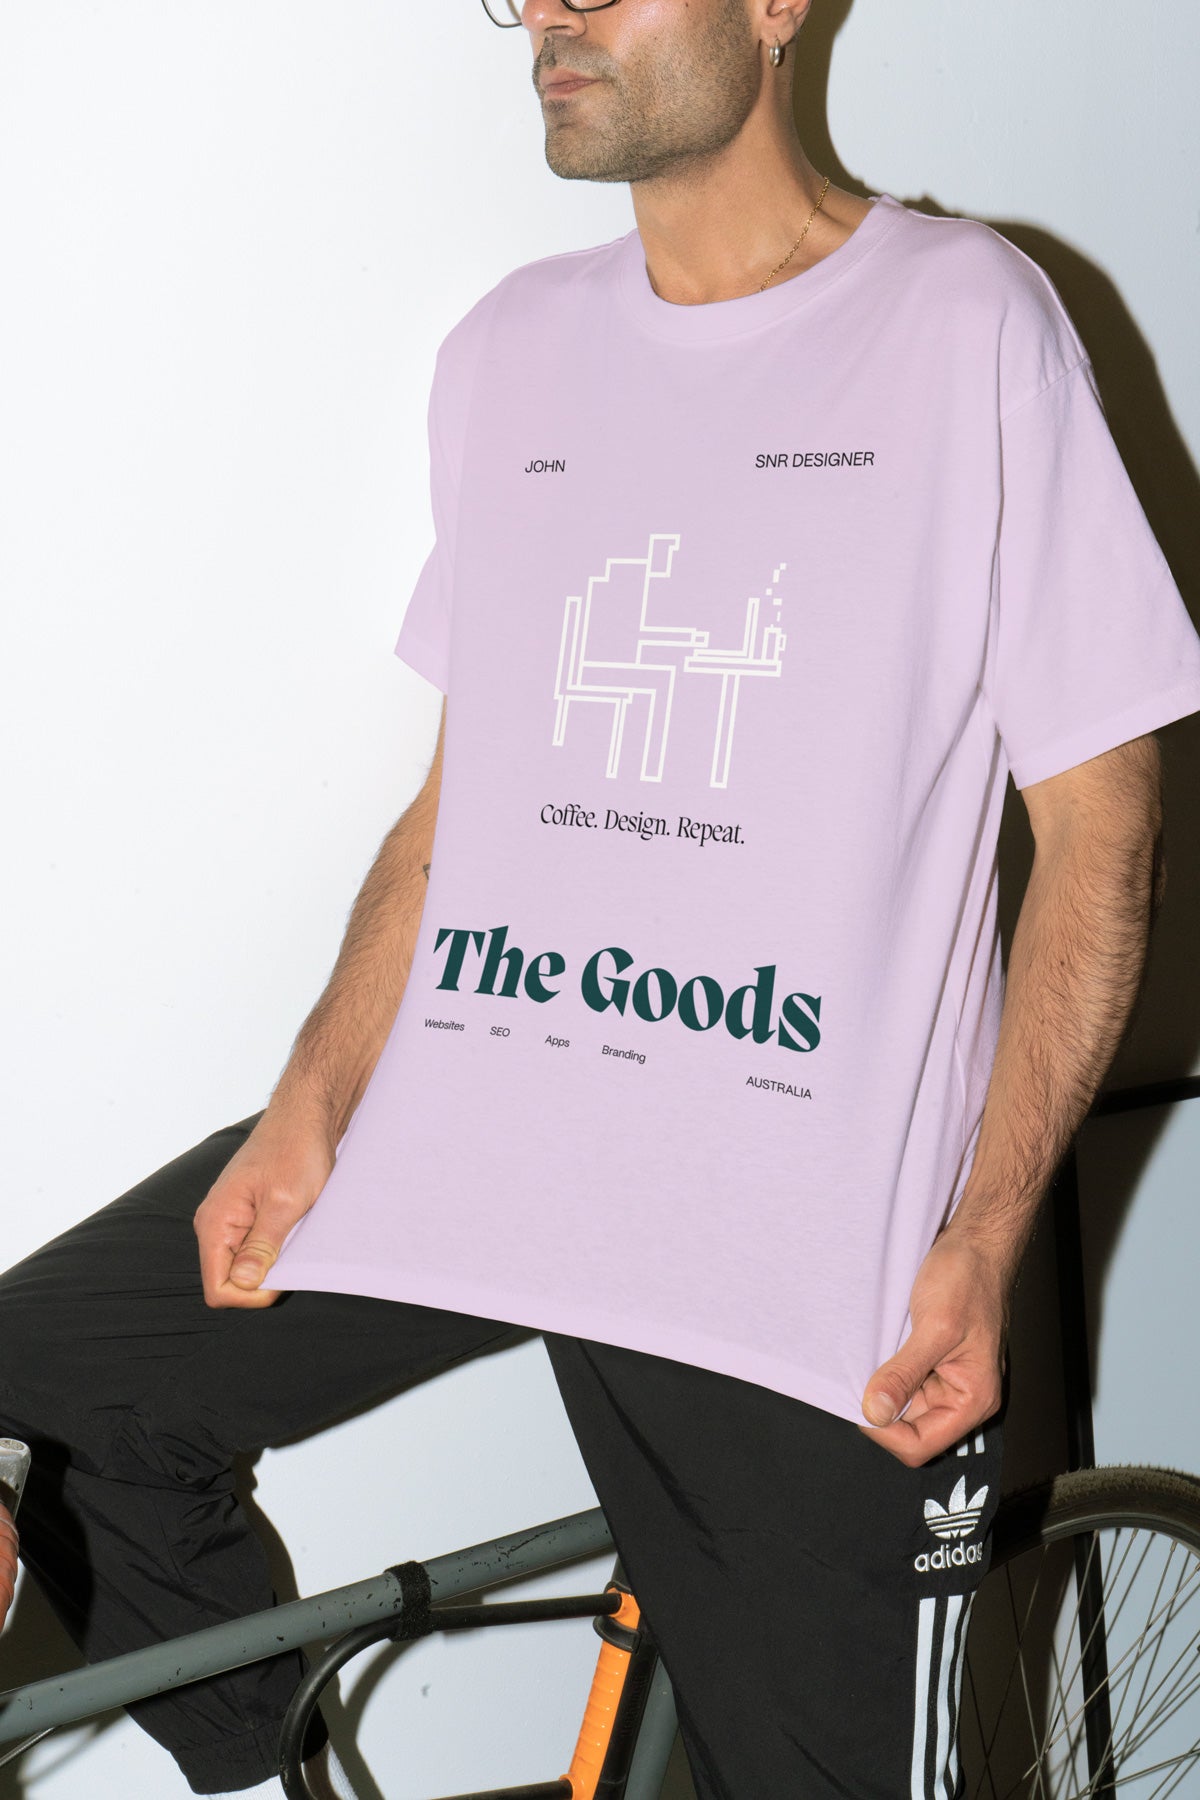 Man holding out his shirt that is printed with The Goods logo